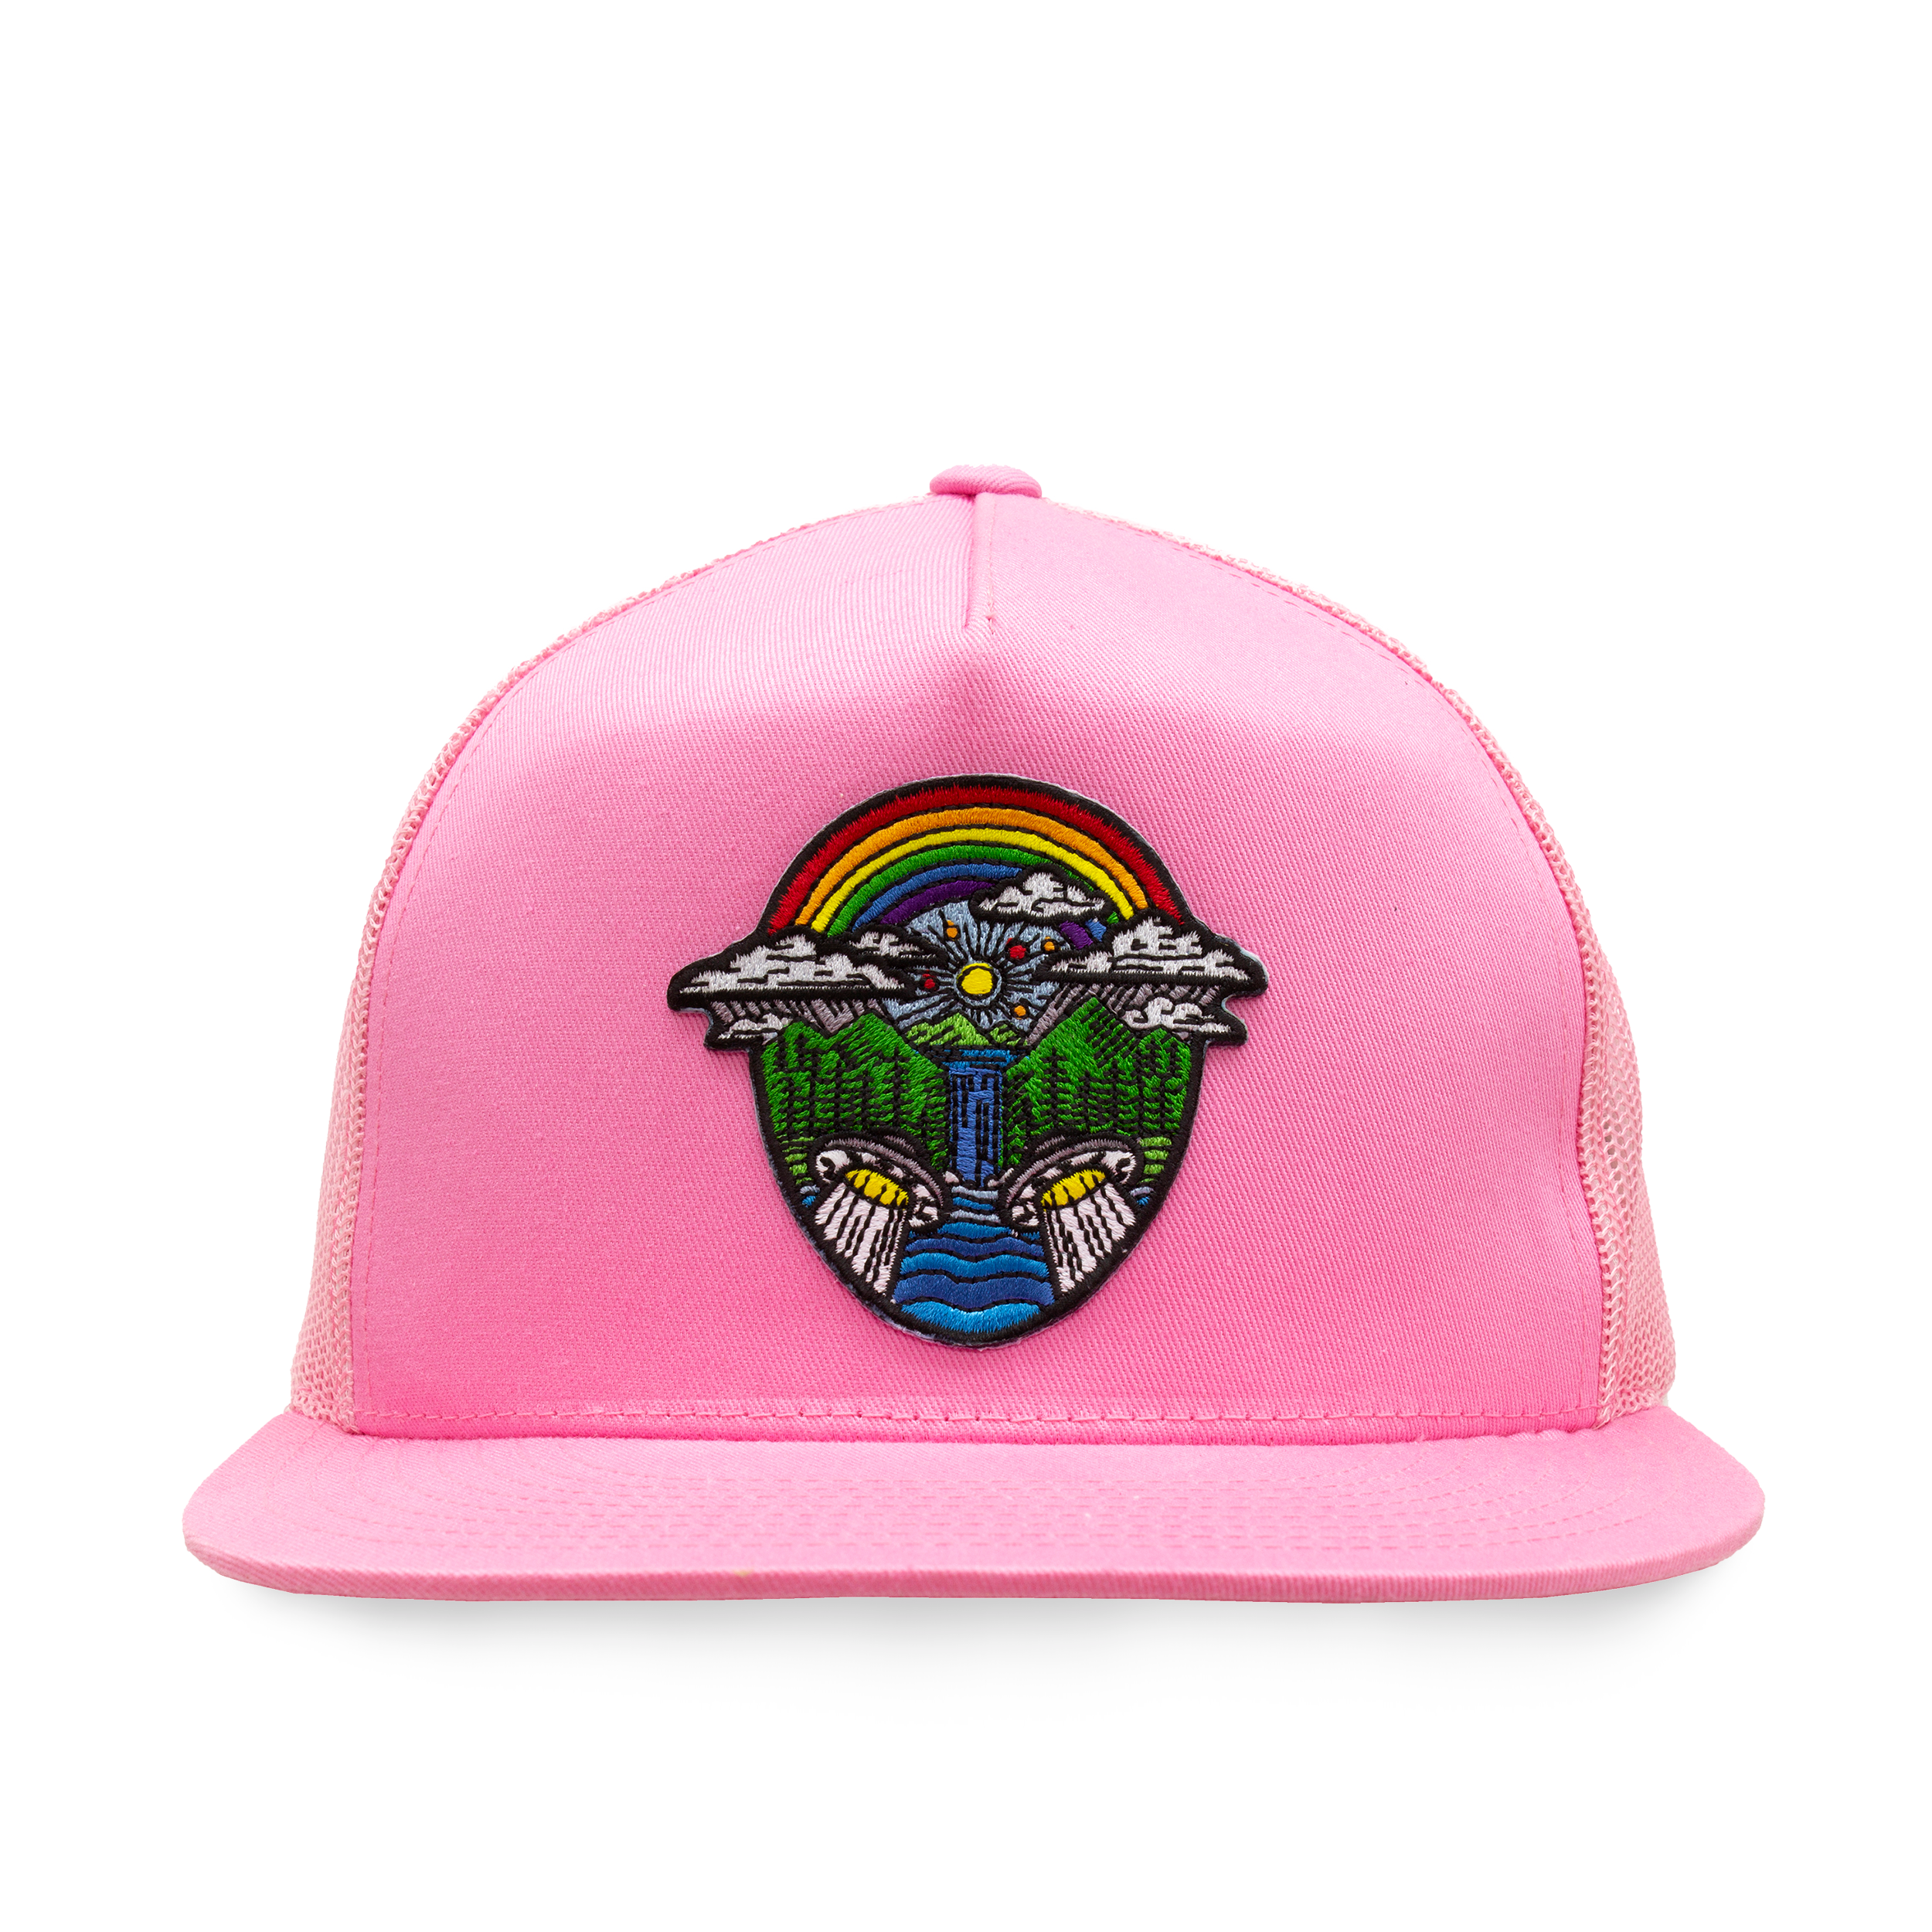 Rainbow Waterfall Patch Pink Hat